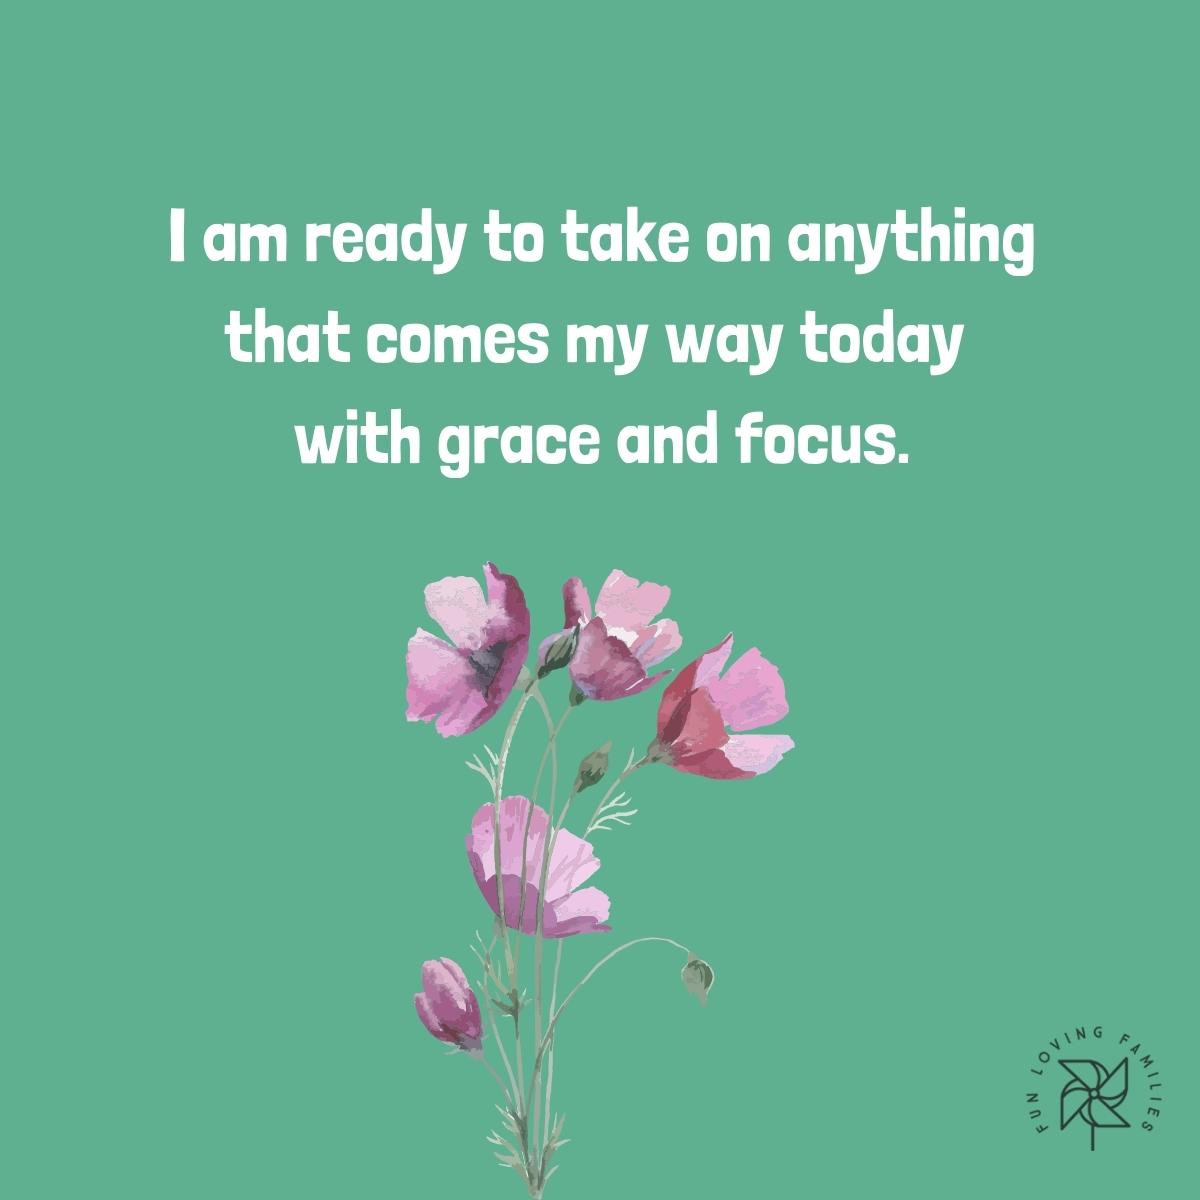 I am ready to take on anything that comes my way affirmation